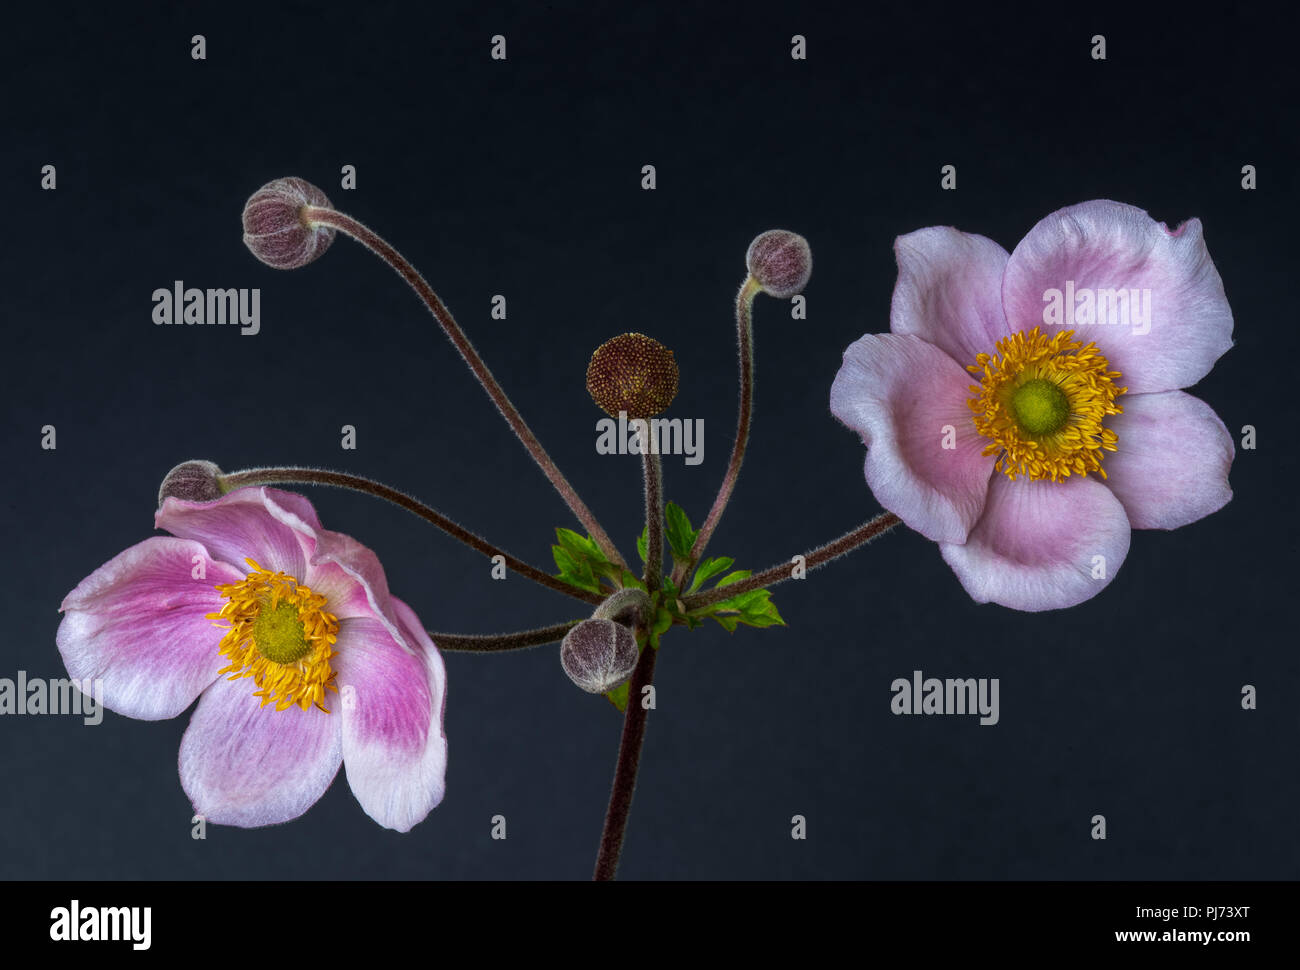 Color fine art still life floral macro flower image of a single isolated pink white autumn anemone with two blossoms,five buds,blue paper background Stock Photo